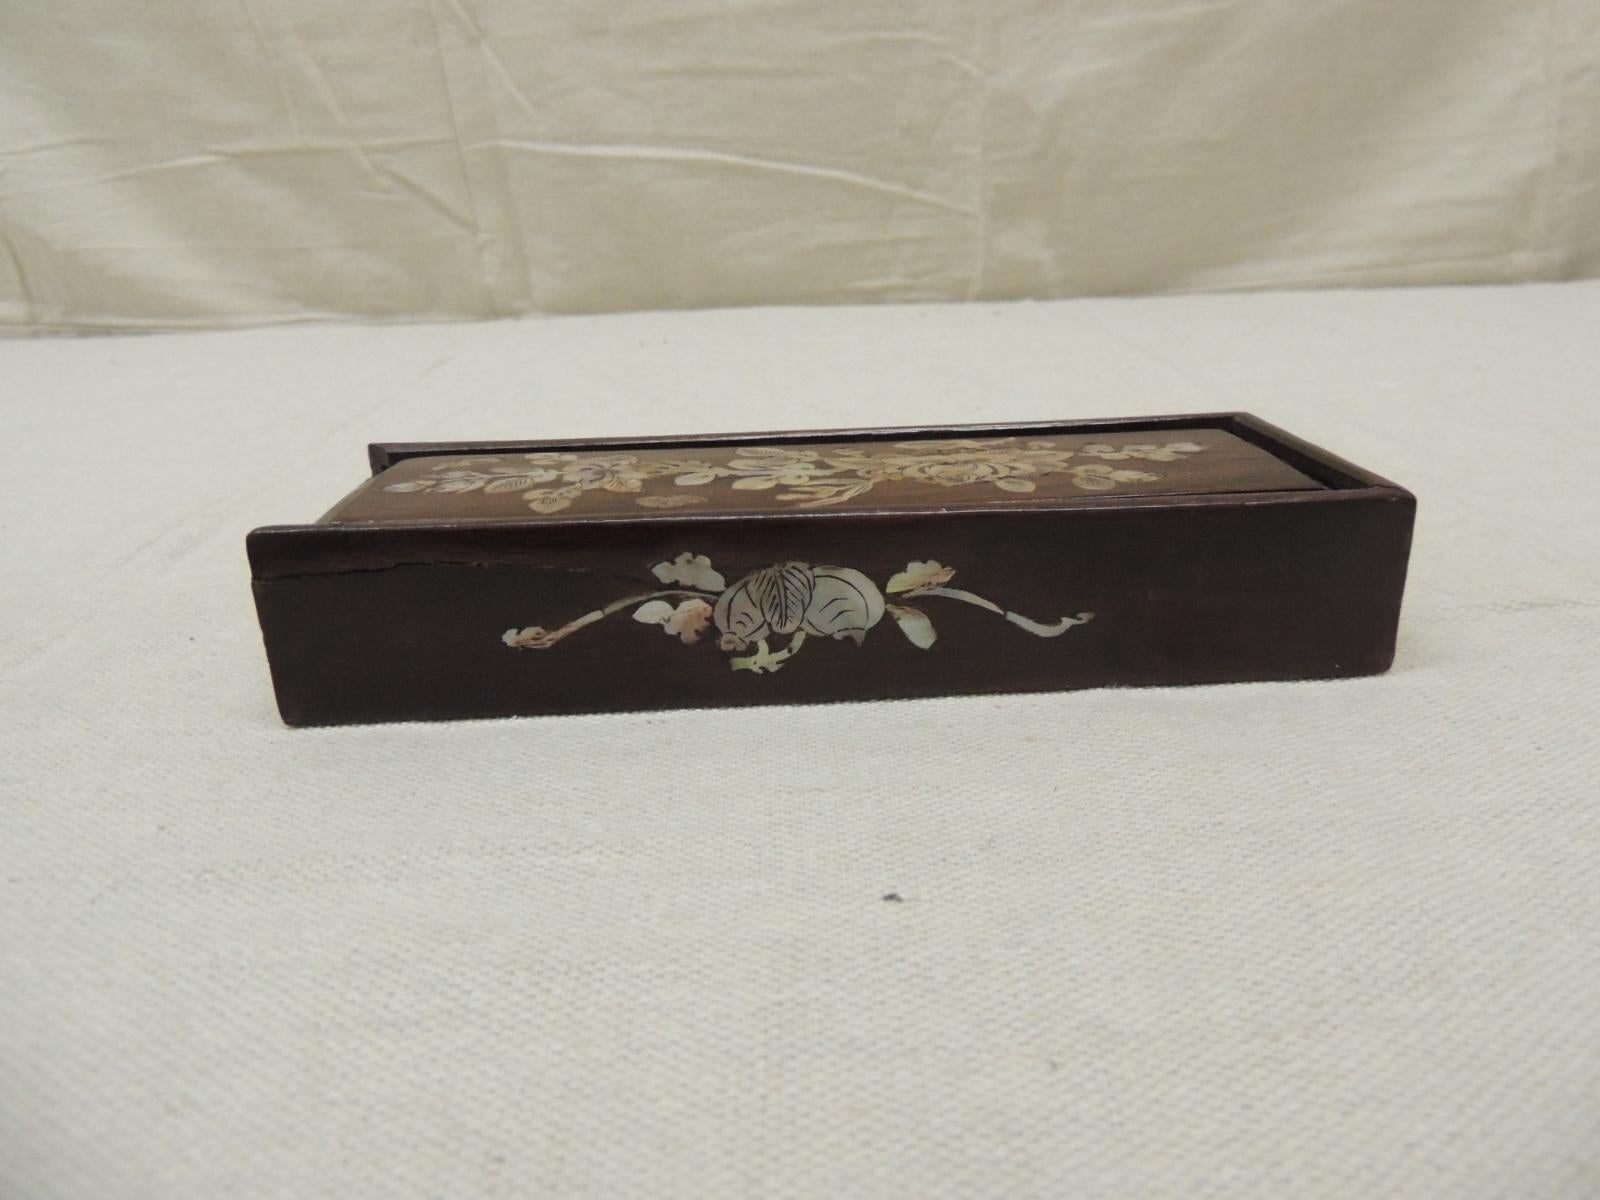 Antique mother of pearl and wood decorative box.
The cover open by sliding the top to the side.
Size: 7.5” L x 2.5” W x 1.25” H.